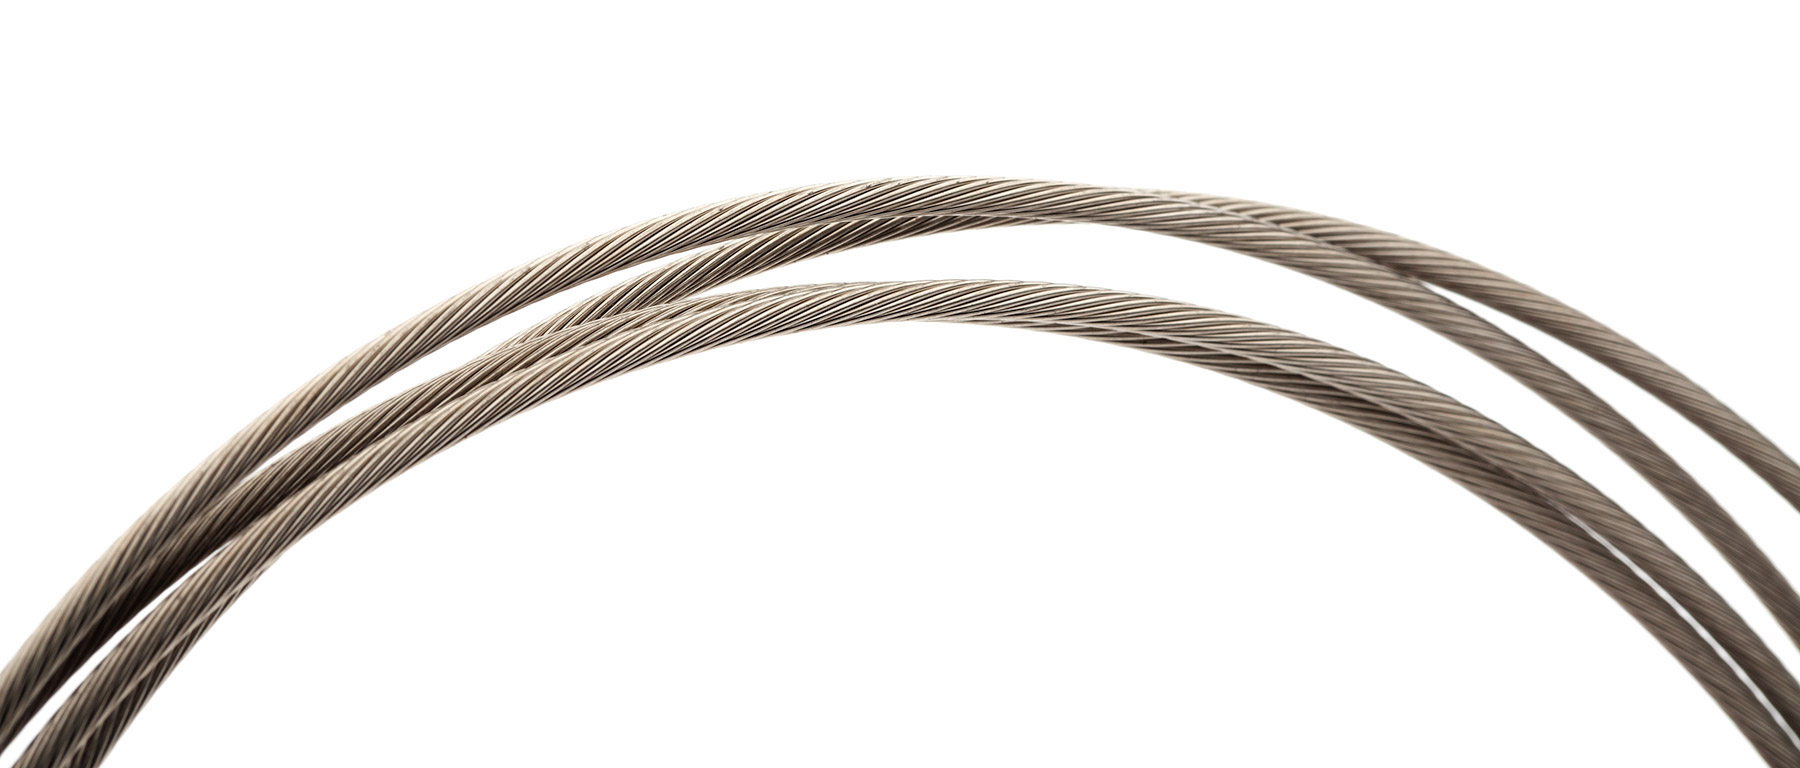 Campagnolo Stainless Steel Brake Cable